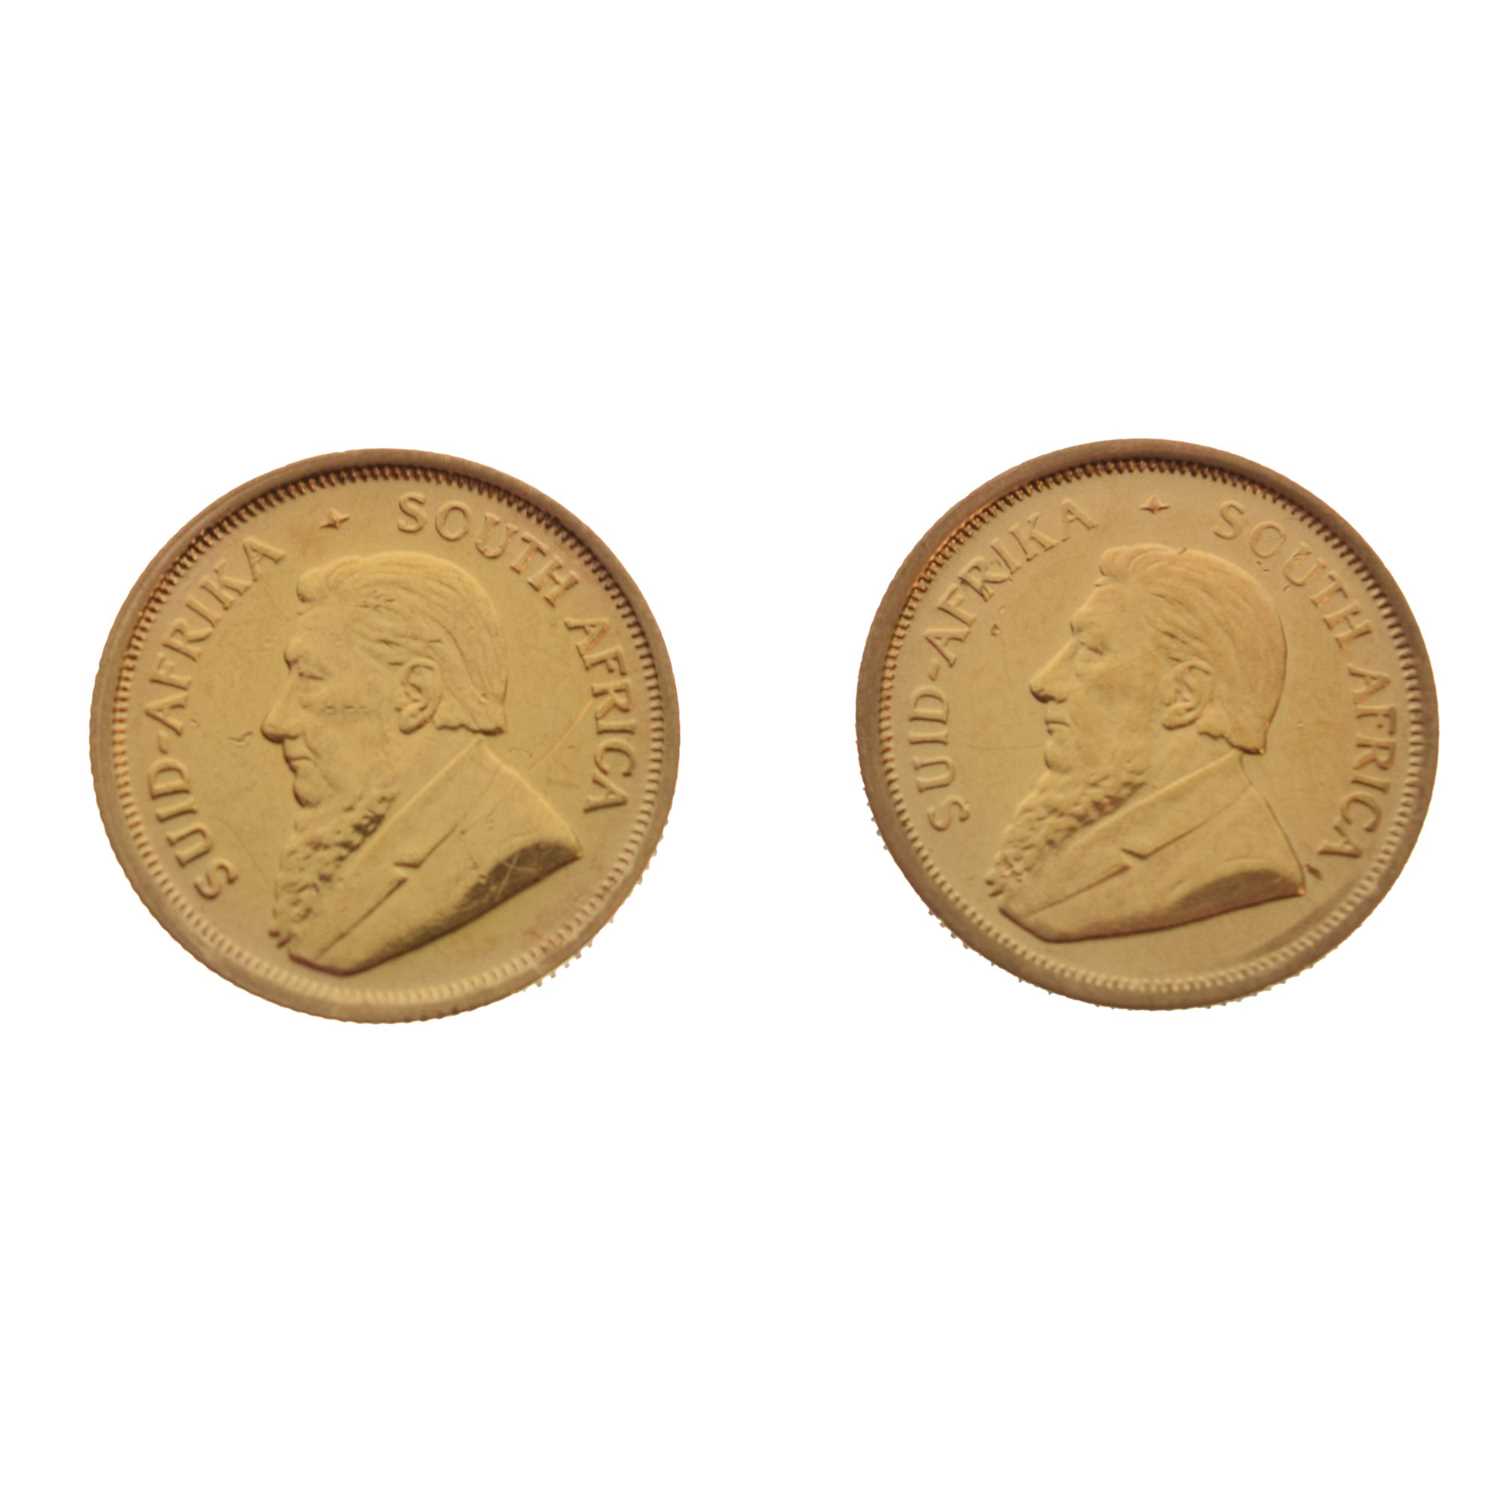 Two South African Fine Gold 1/10 Krugerrand, 1985